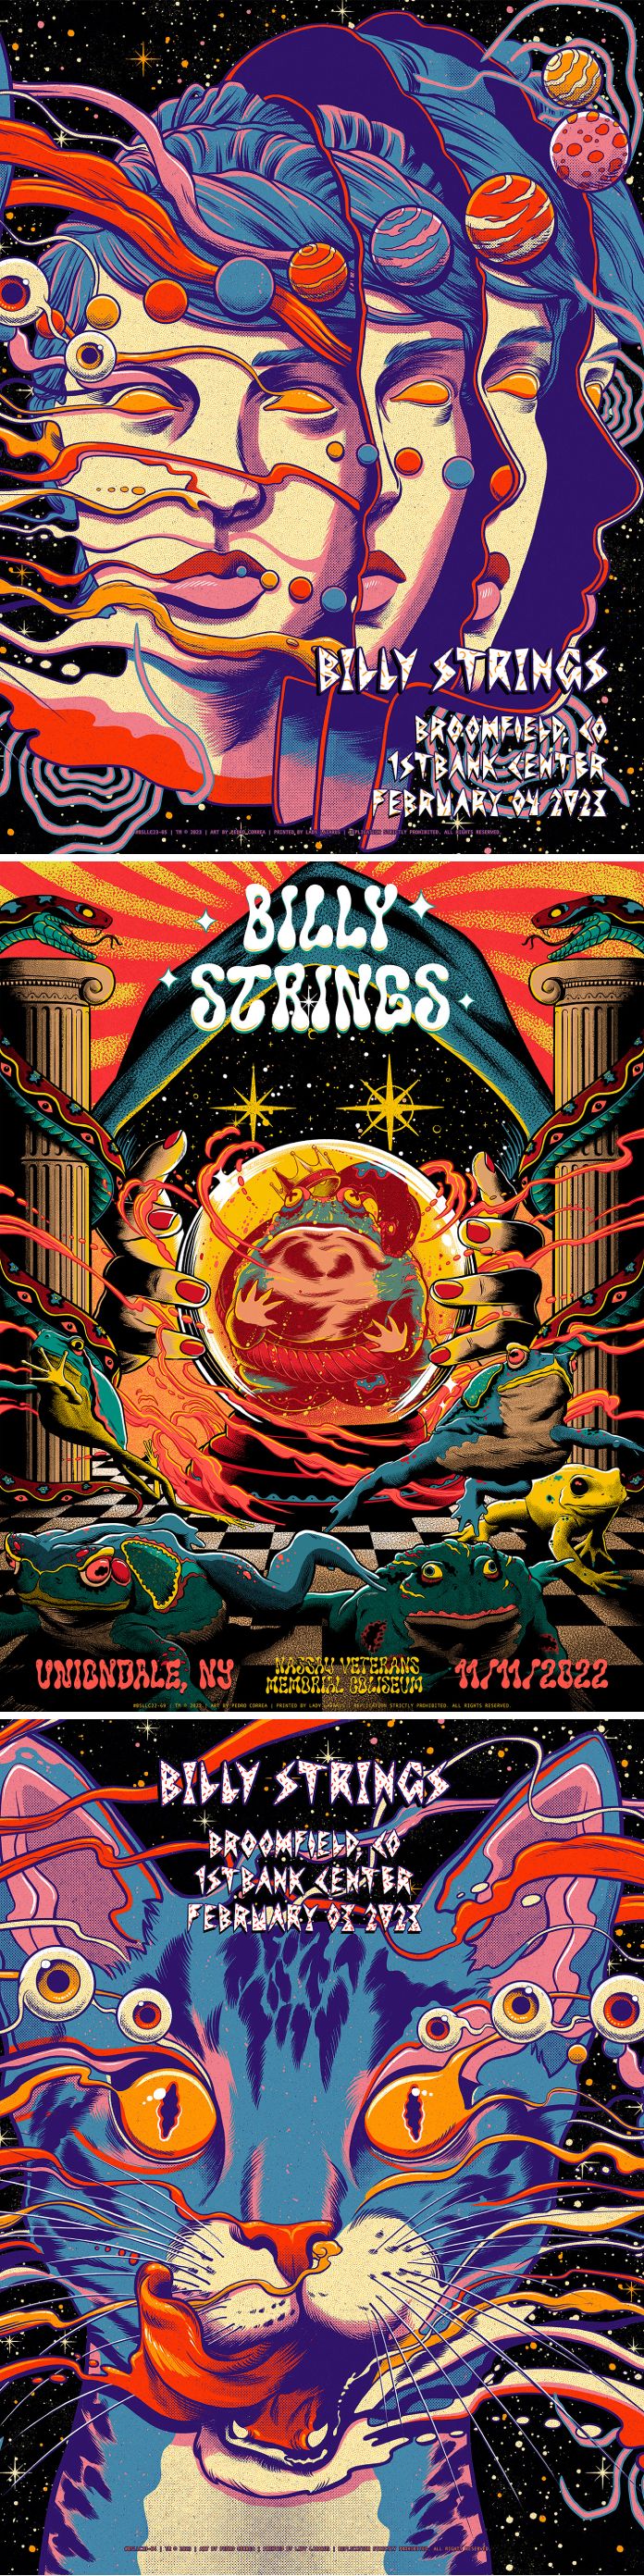 Billy Strings Posters by Pedro Correa